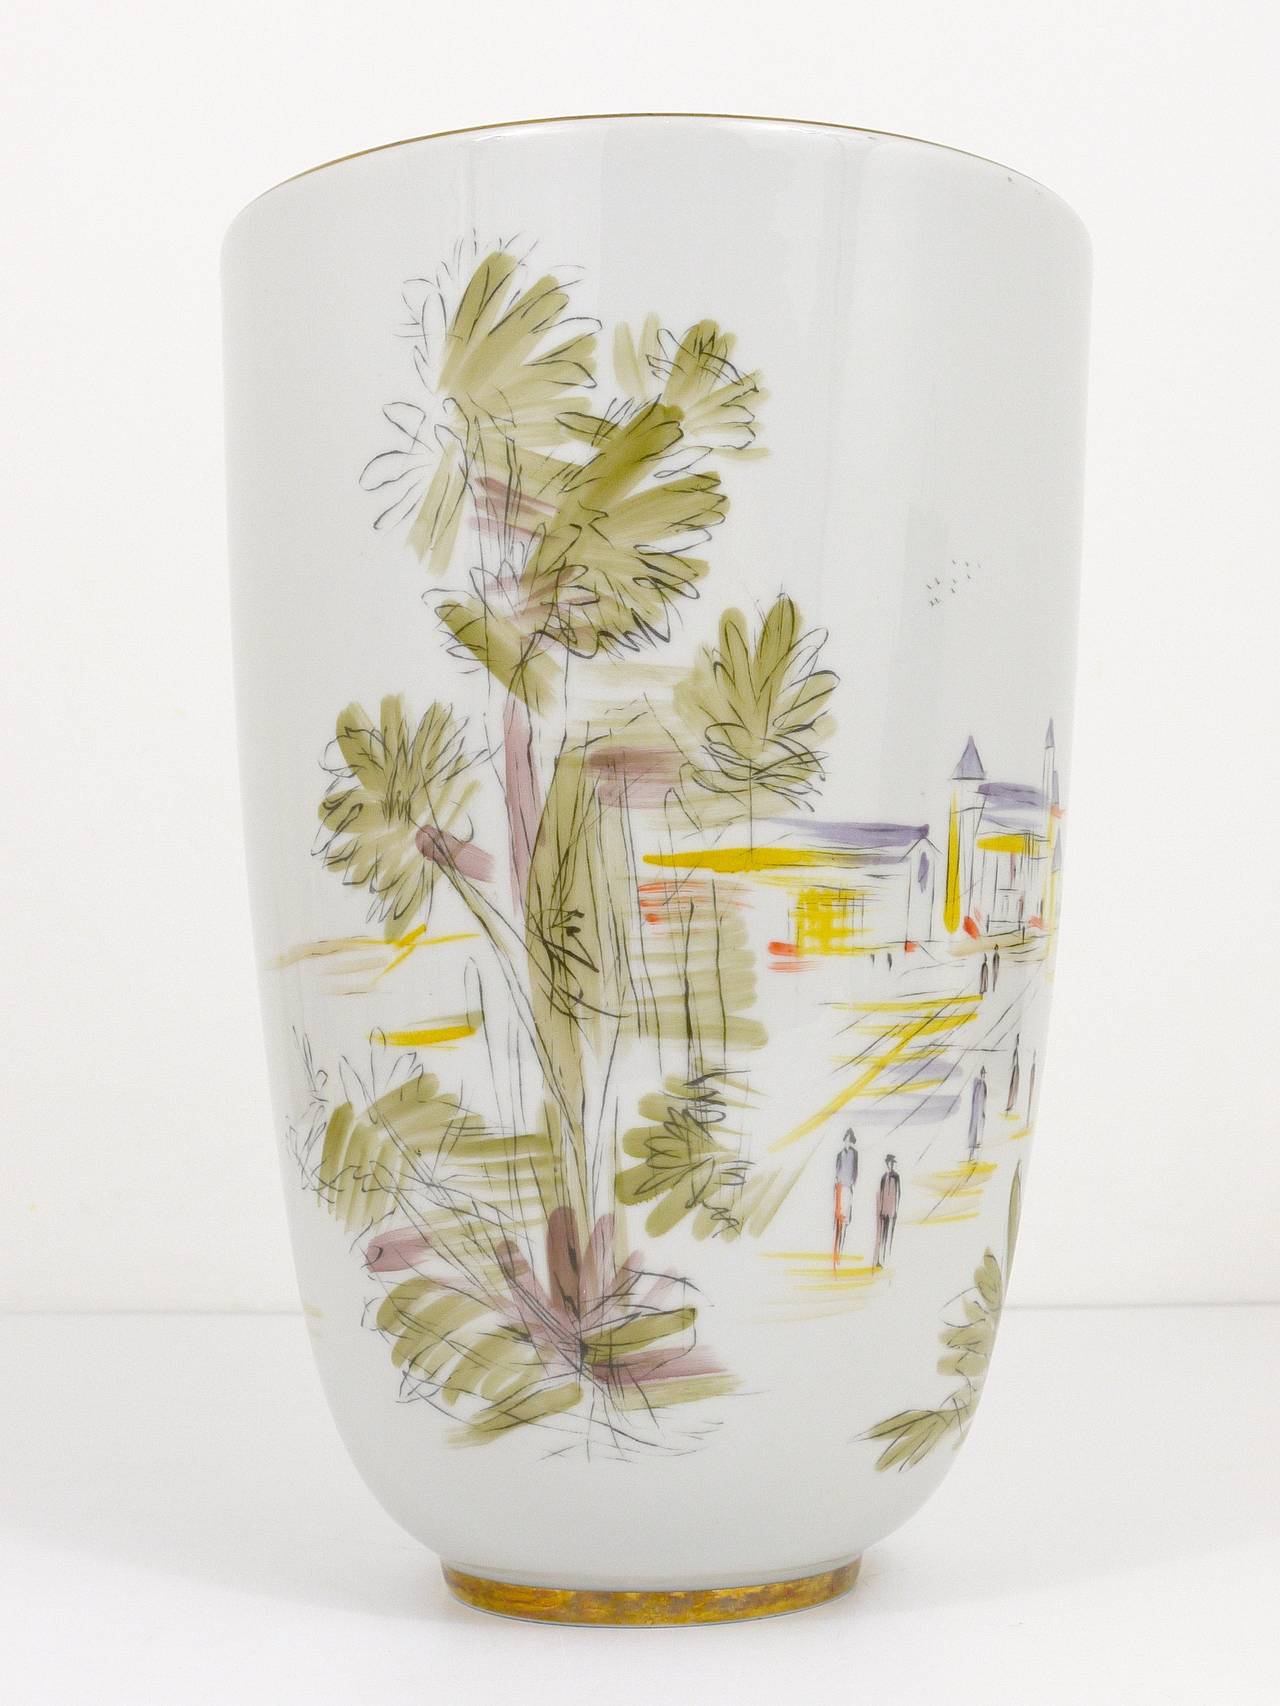 20th Century Huge Hutschenreuther Handpainted Midcentury Porcelain Vase, Selb, Germany, 1950s For Sale